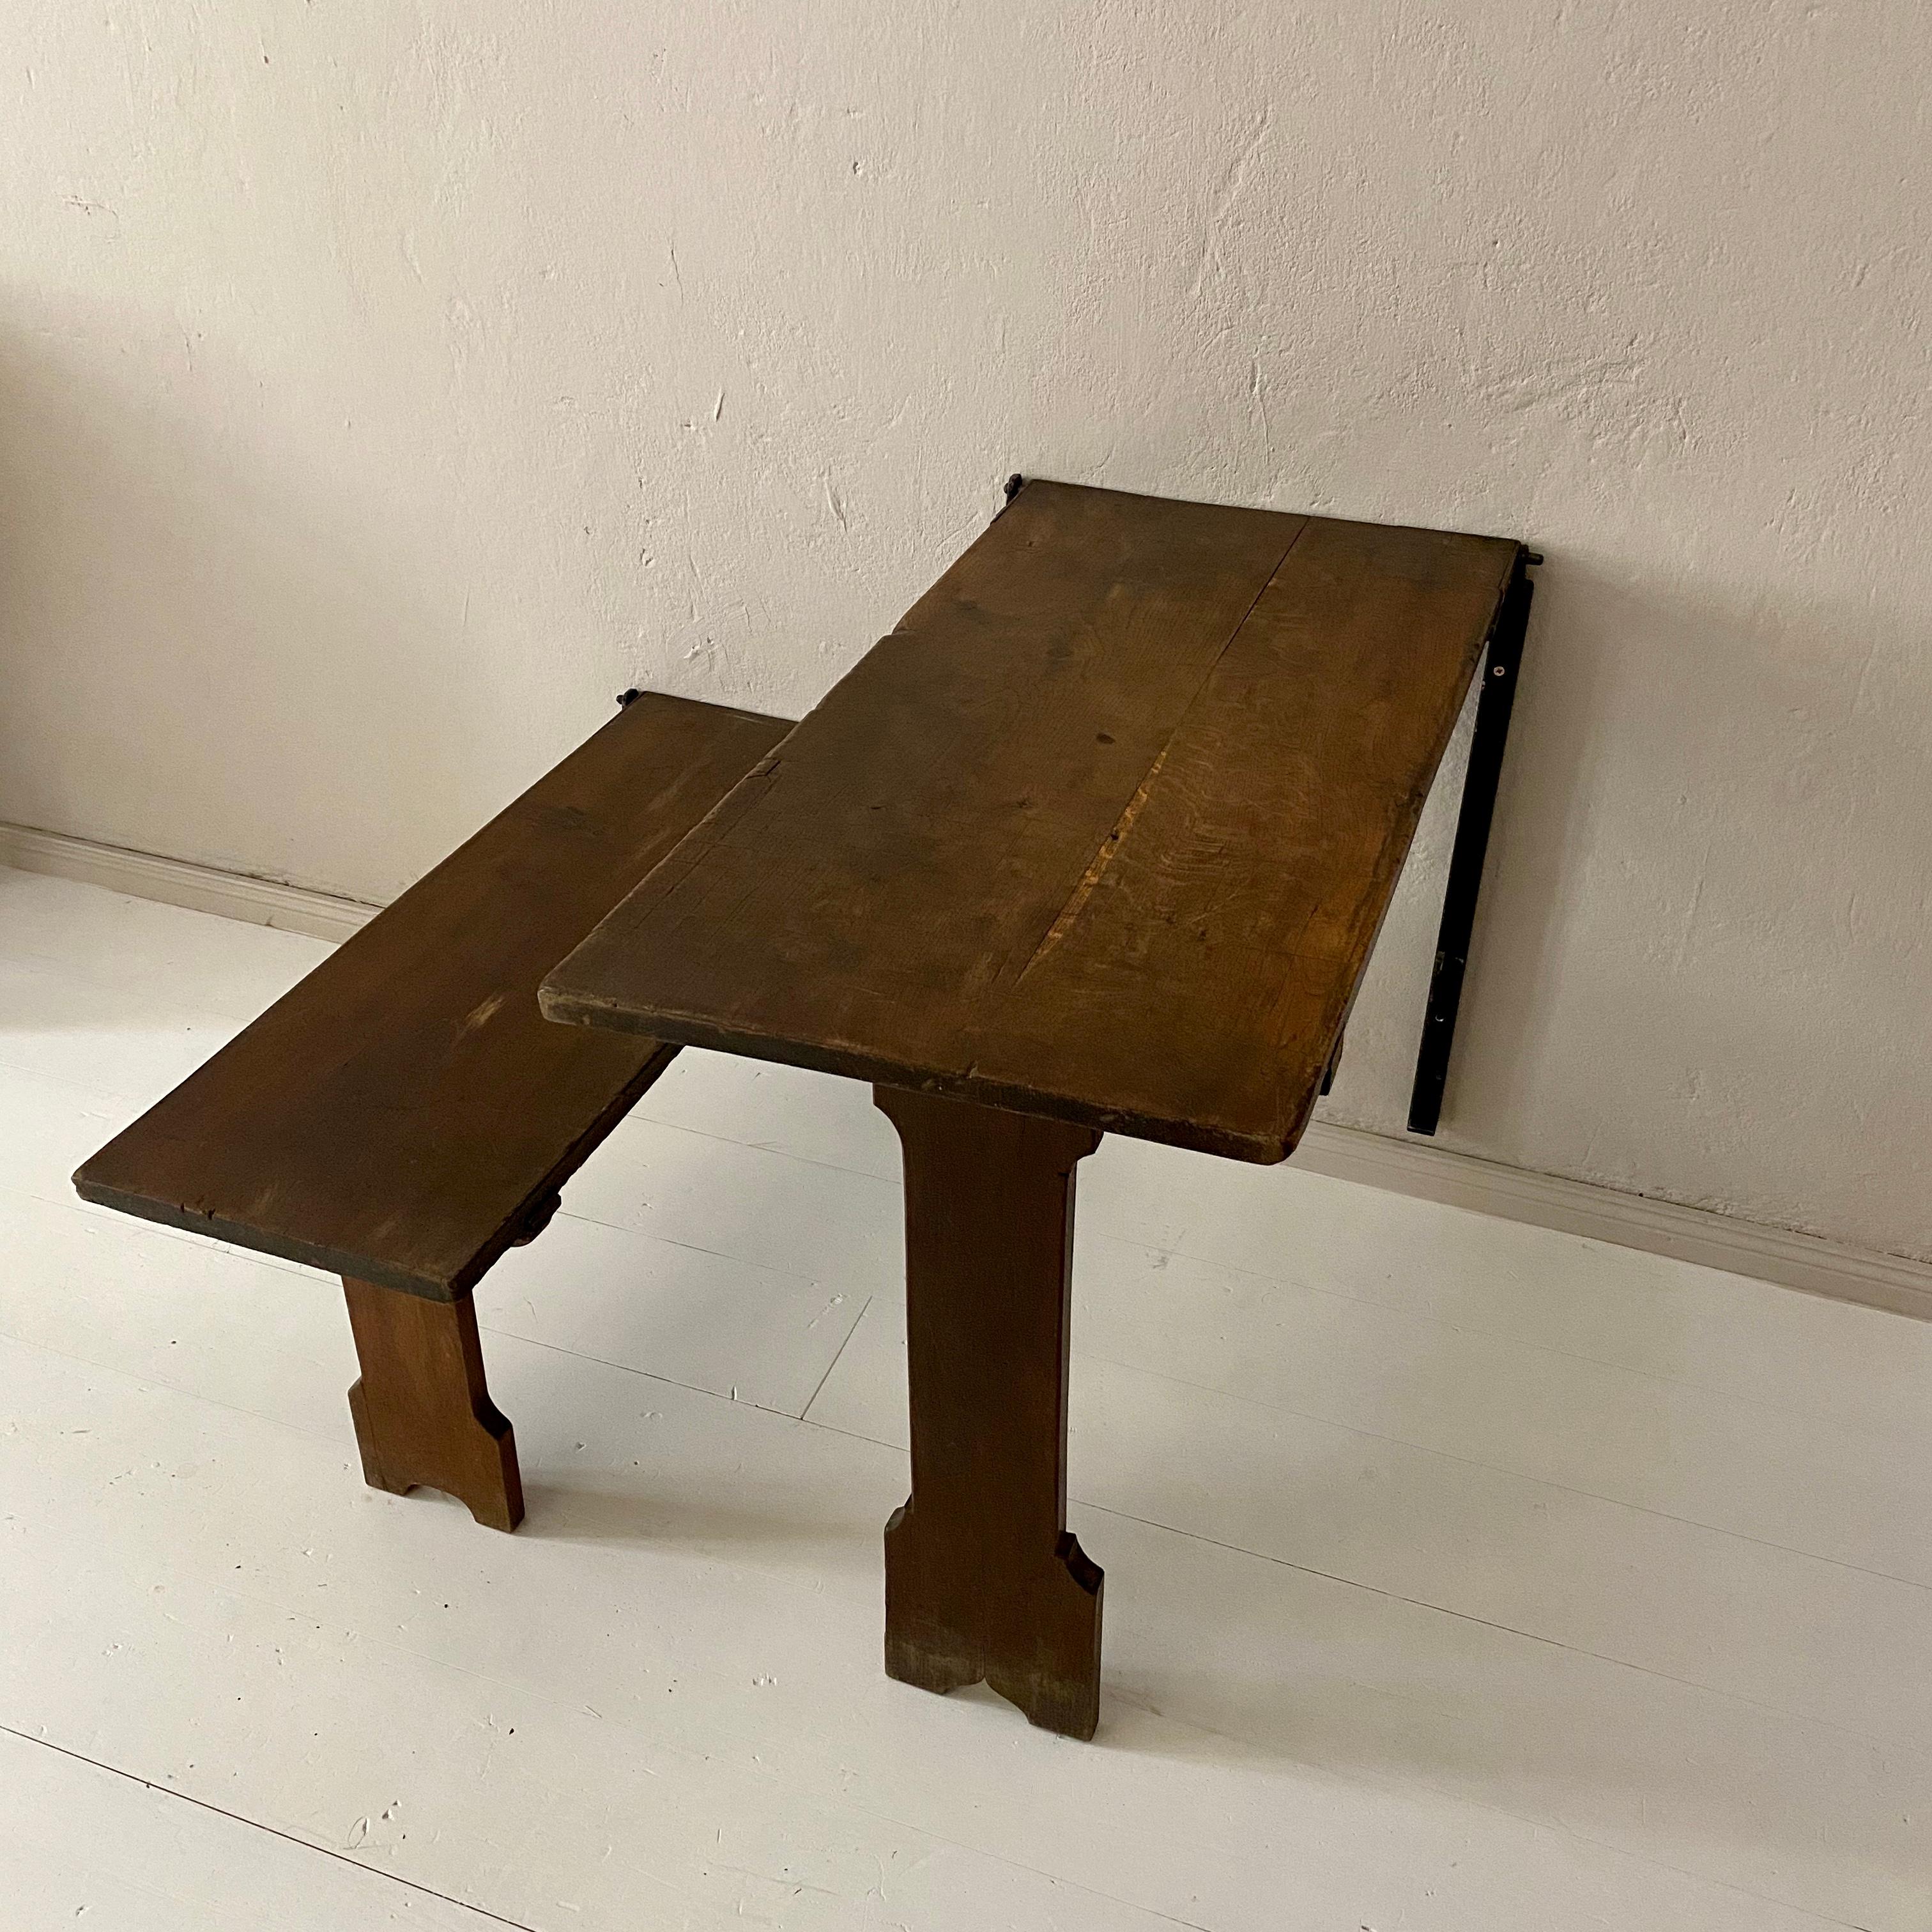 Metal German Art Deco Wabi Sabi Naive Brown Oak Prison Cell Table and Bench, 1930s For Sale